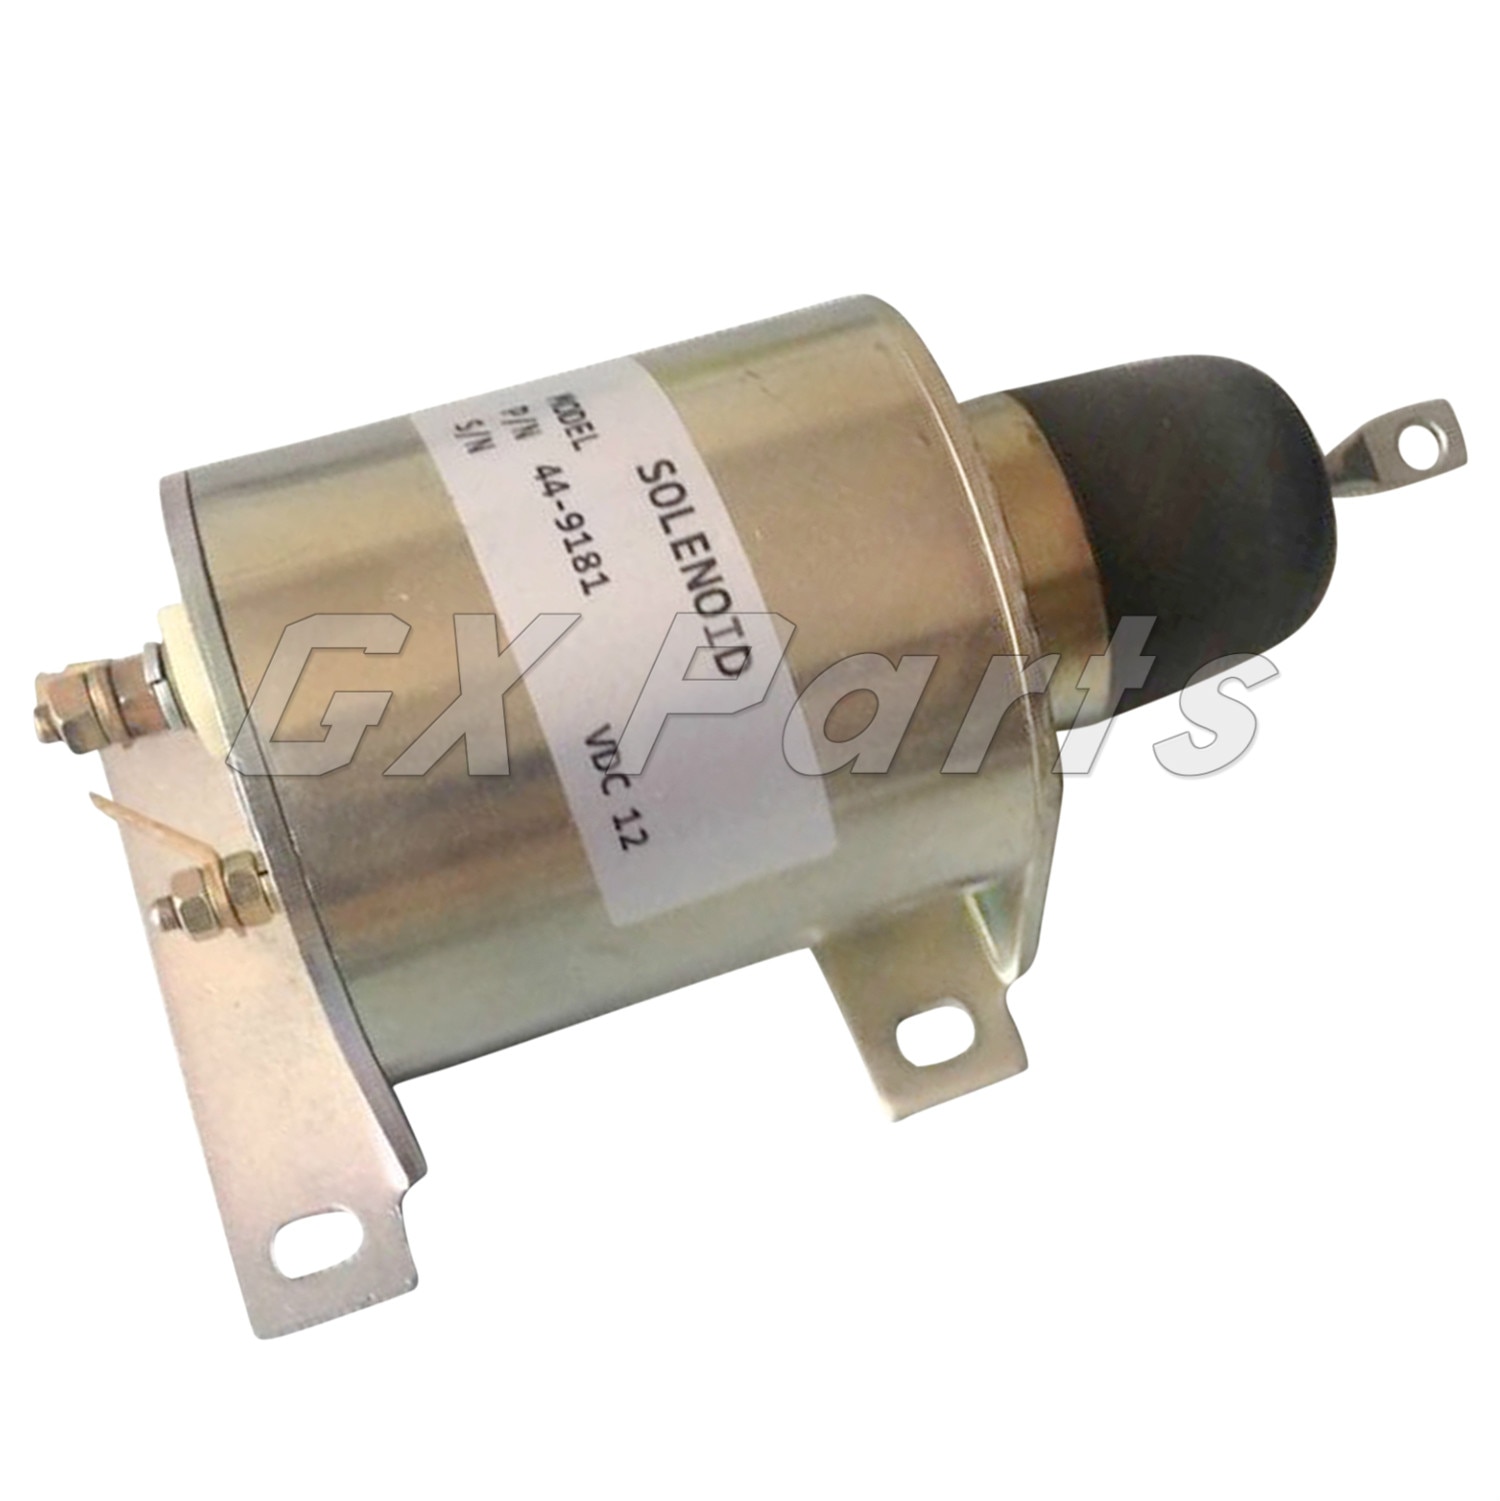 44-918 449181 41-1566 12V   ̵ַ Thermo Kin..